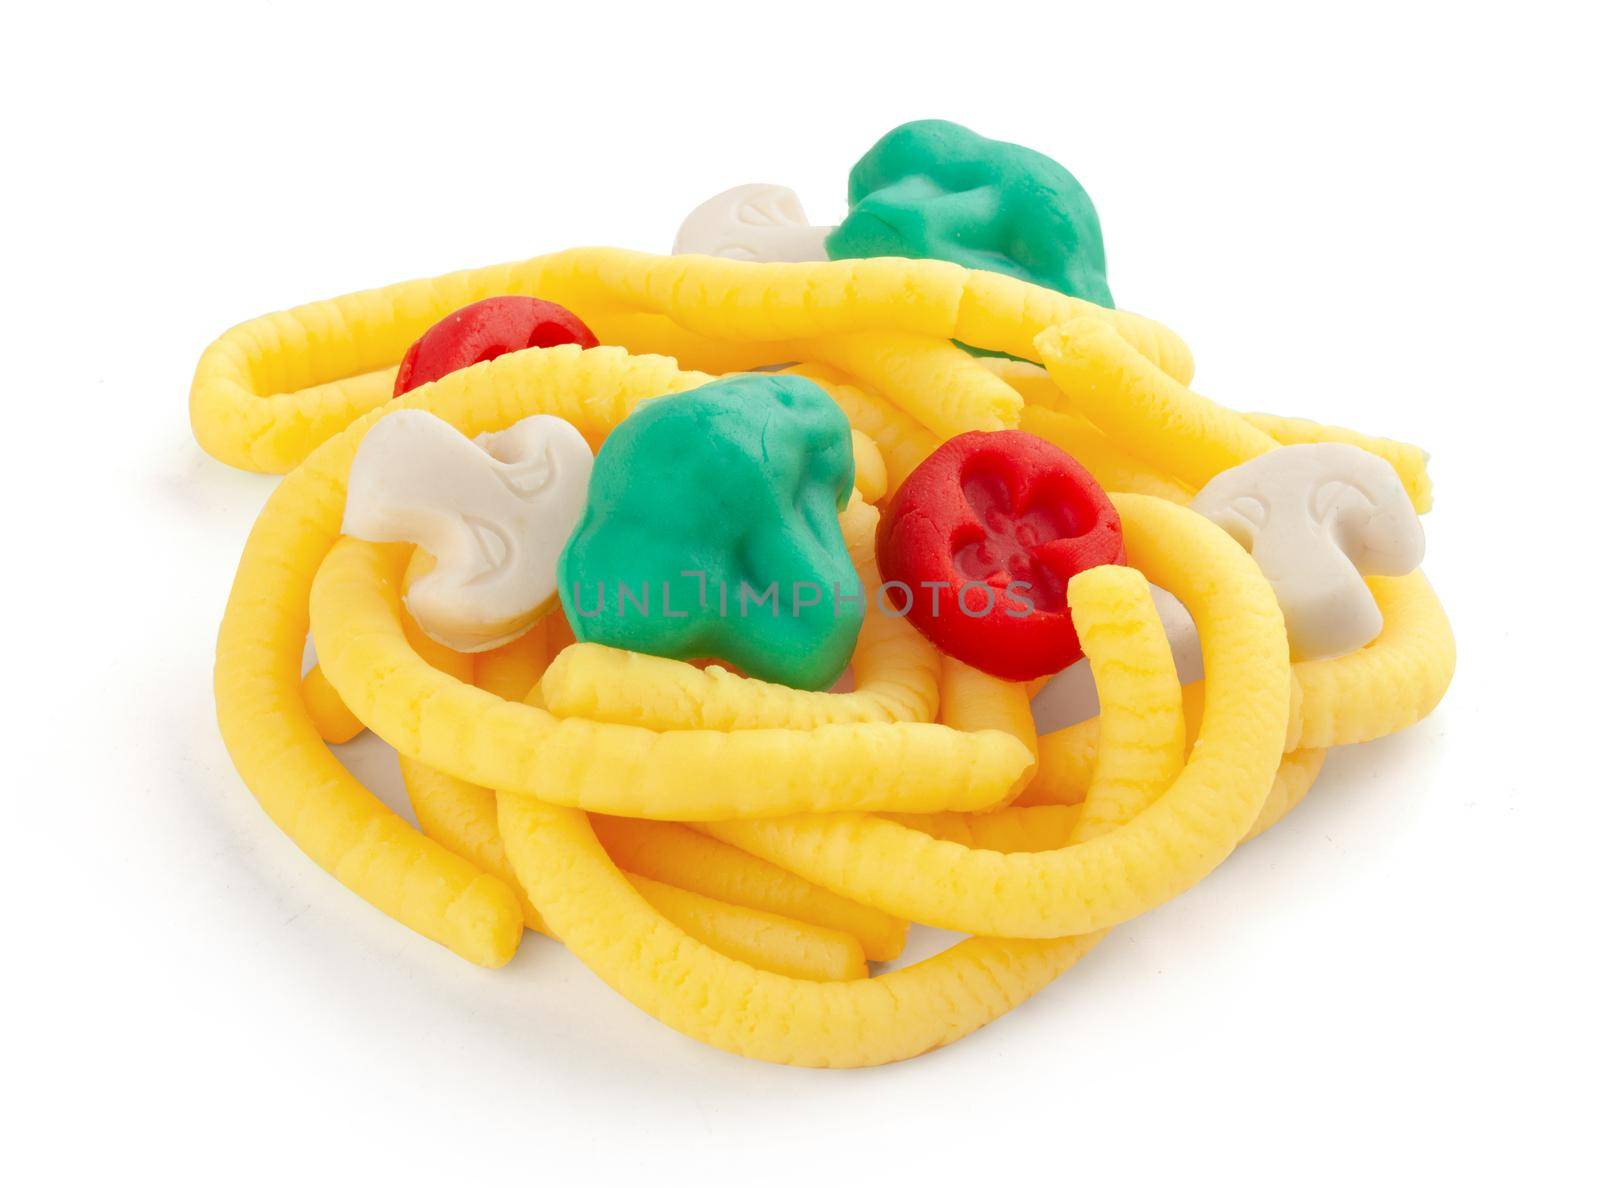 Isolated plasticine pasta with vegetables on the white